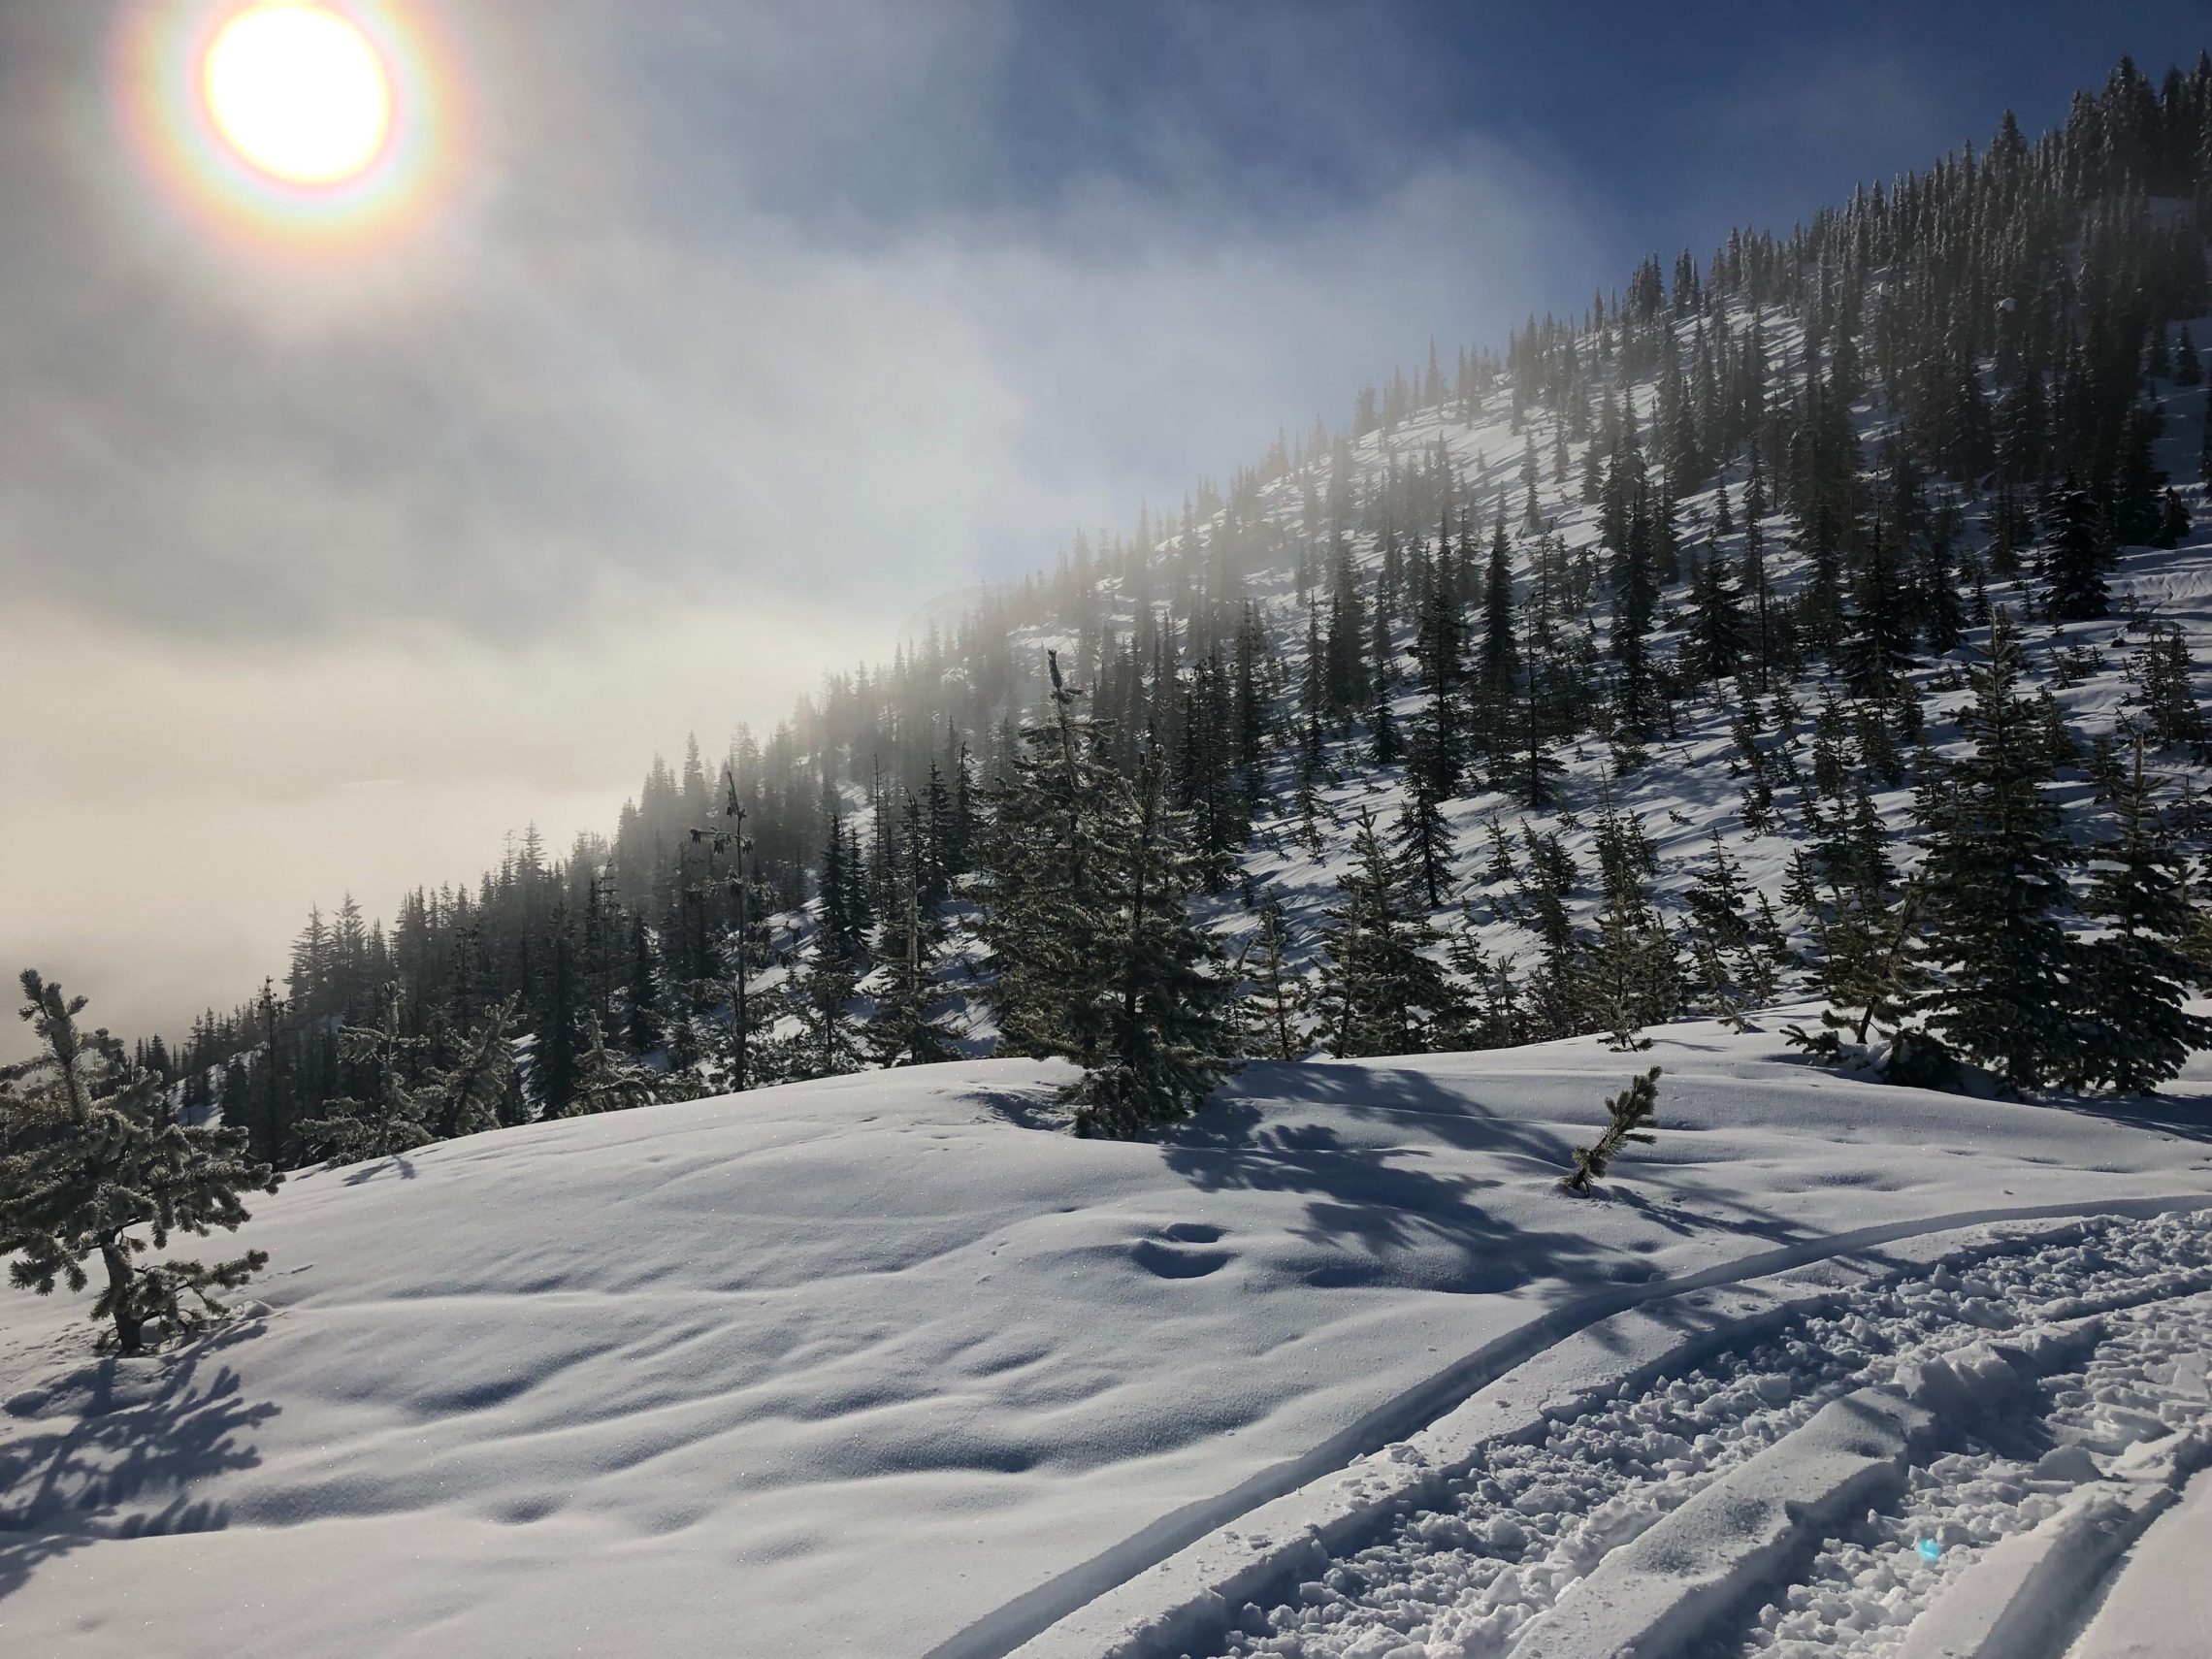 The 2018-19 Northwest snowpack isn’t as robust as water managers would like. At high-elevation near Mt. Adams, creases in the snowpack reveal where rain has run downhill. CREDIT: GARY KING